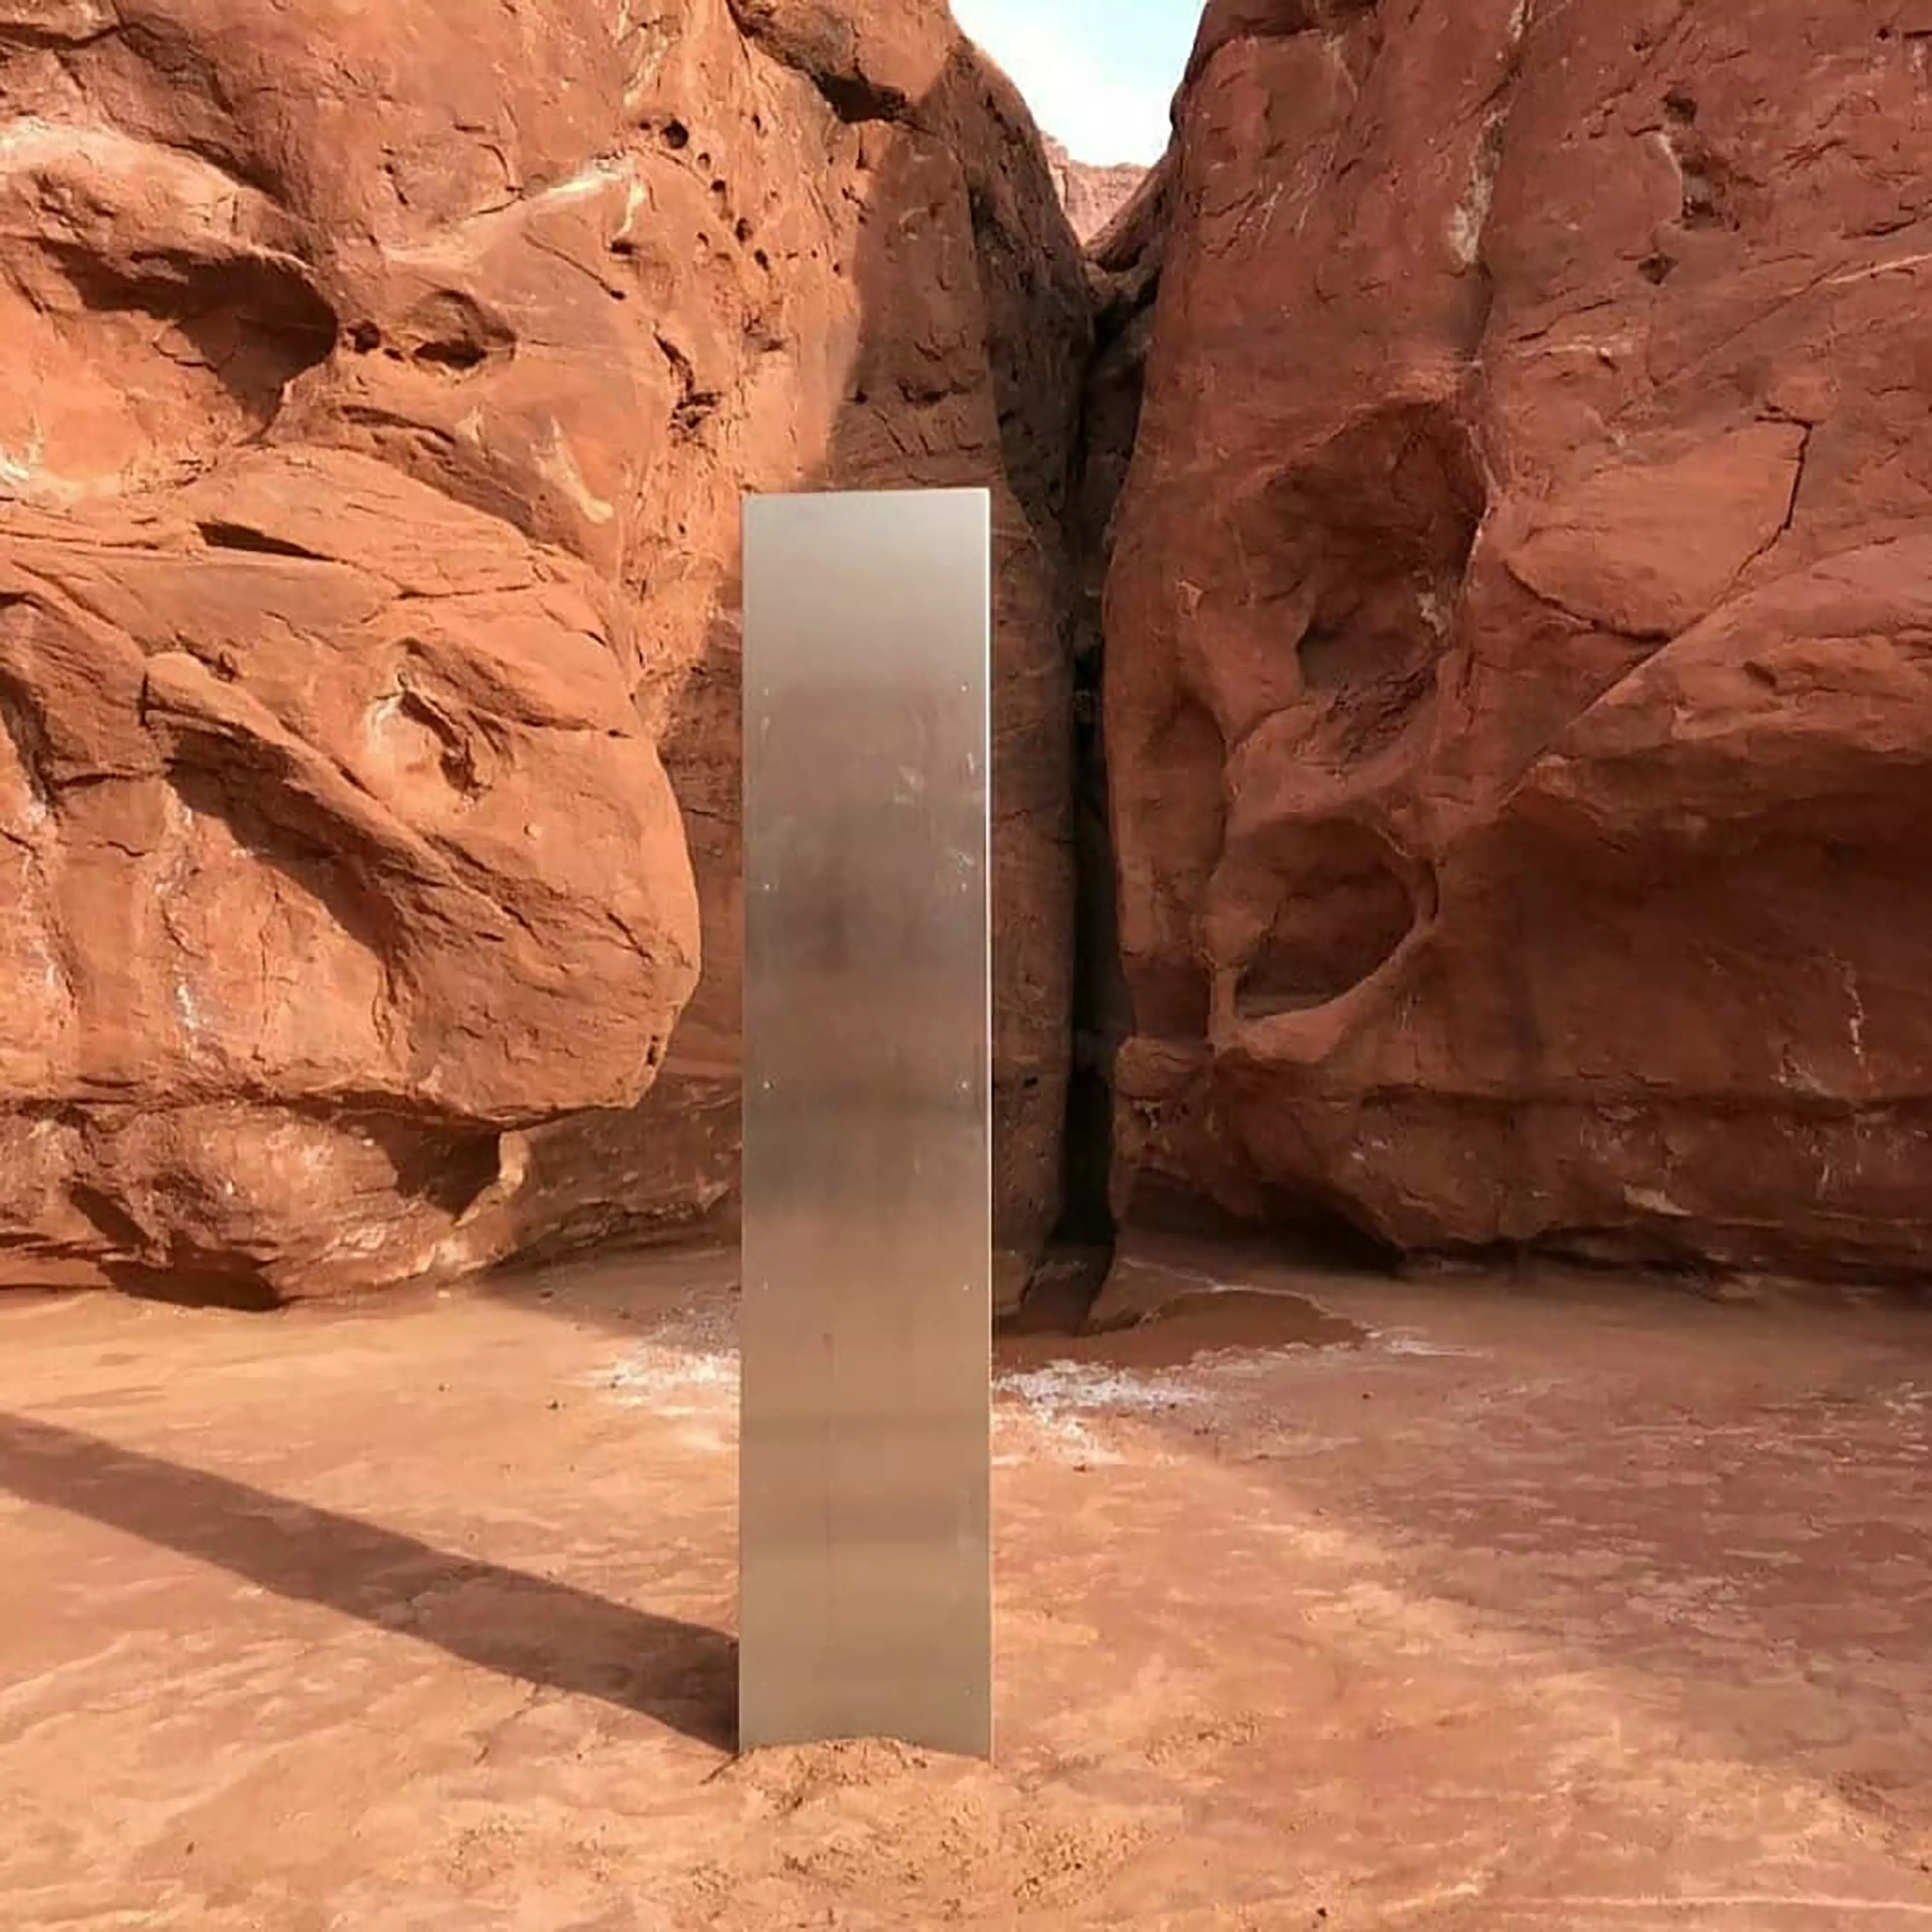 The first monolith was found in Utah, US.